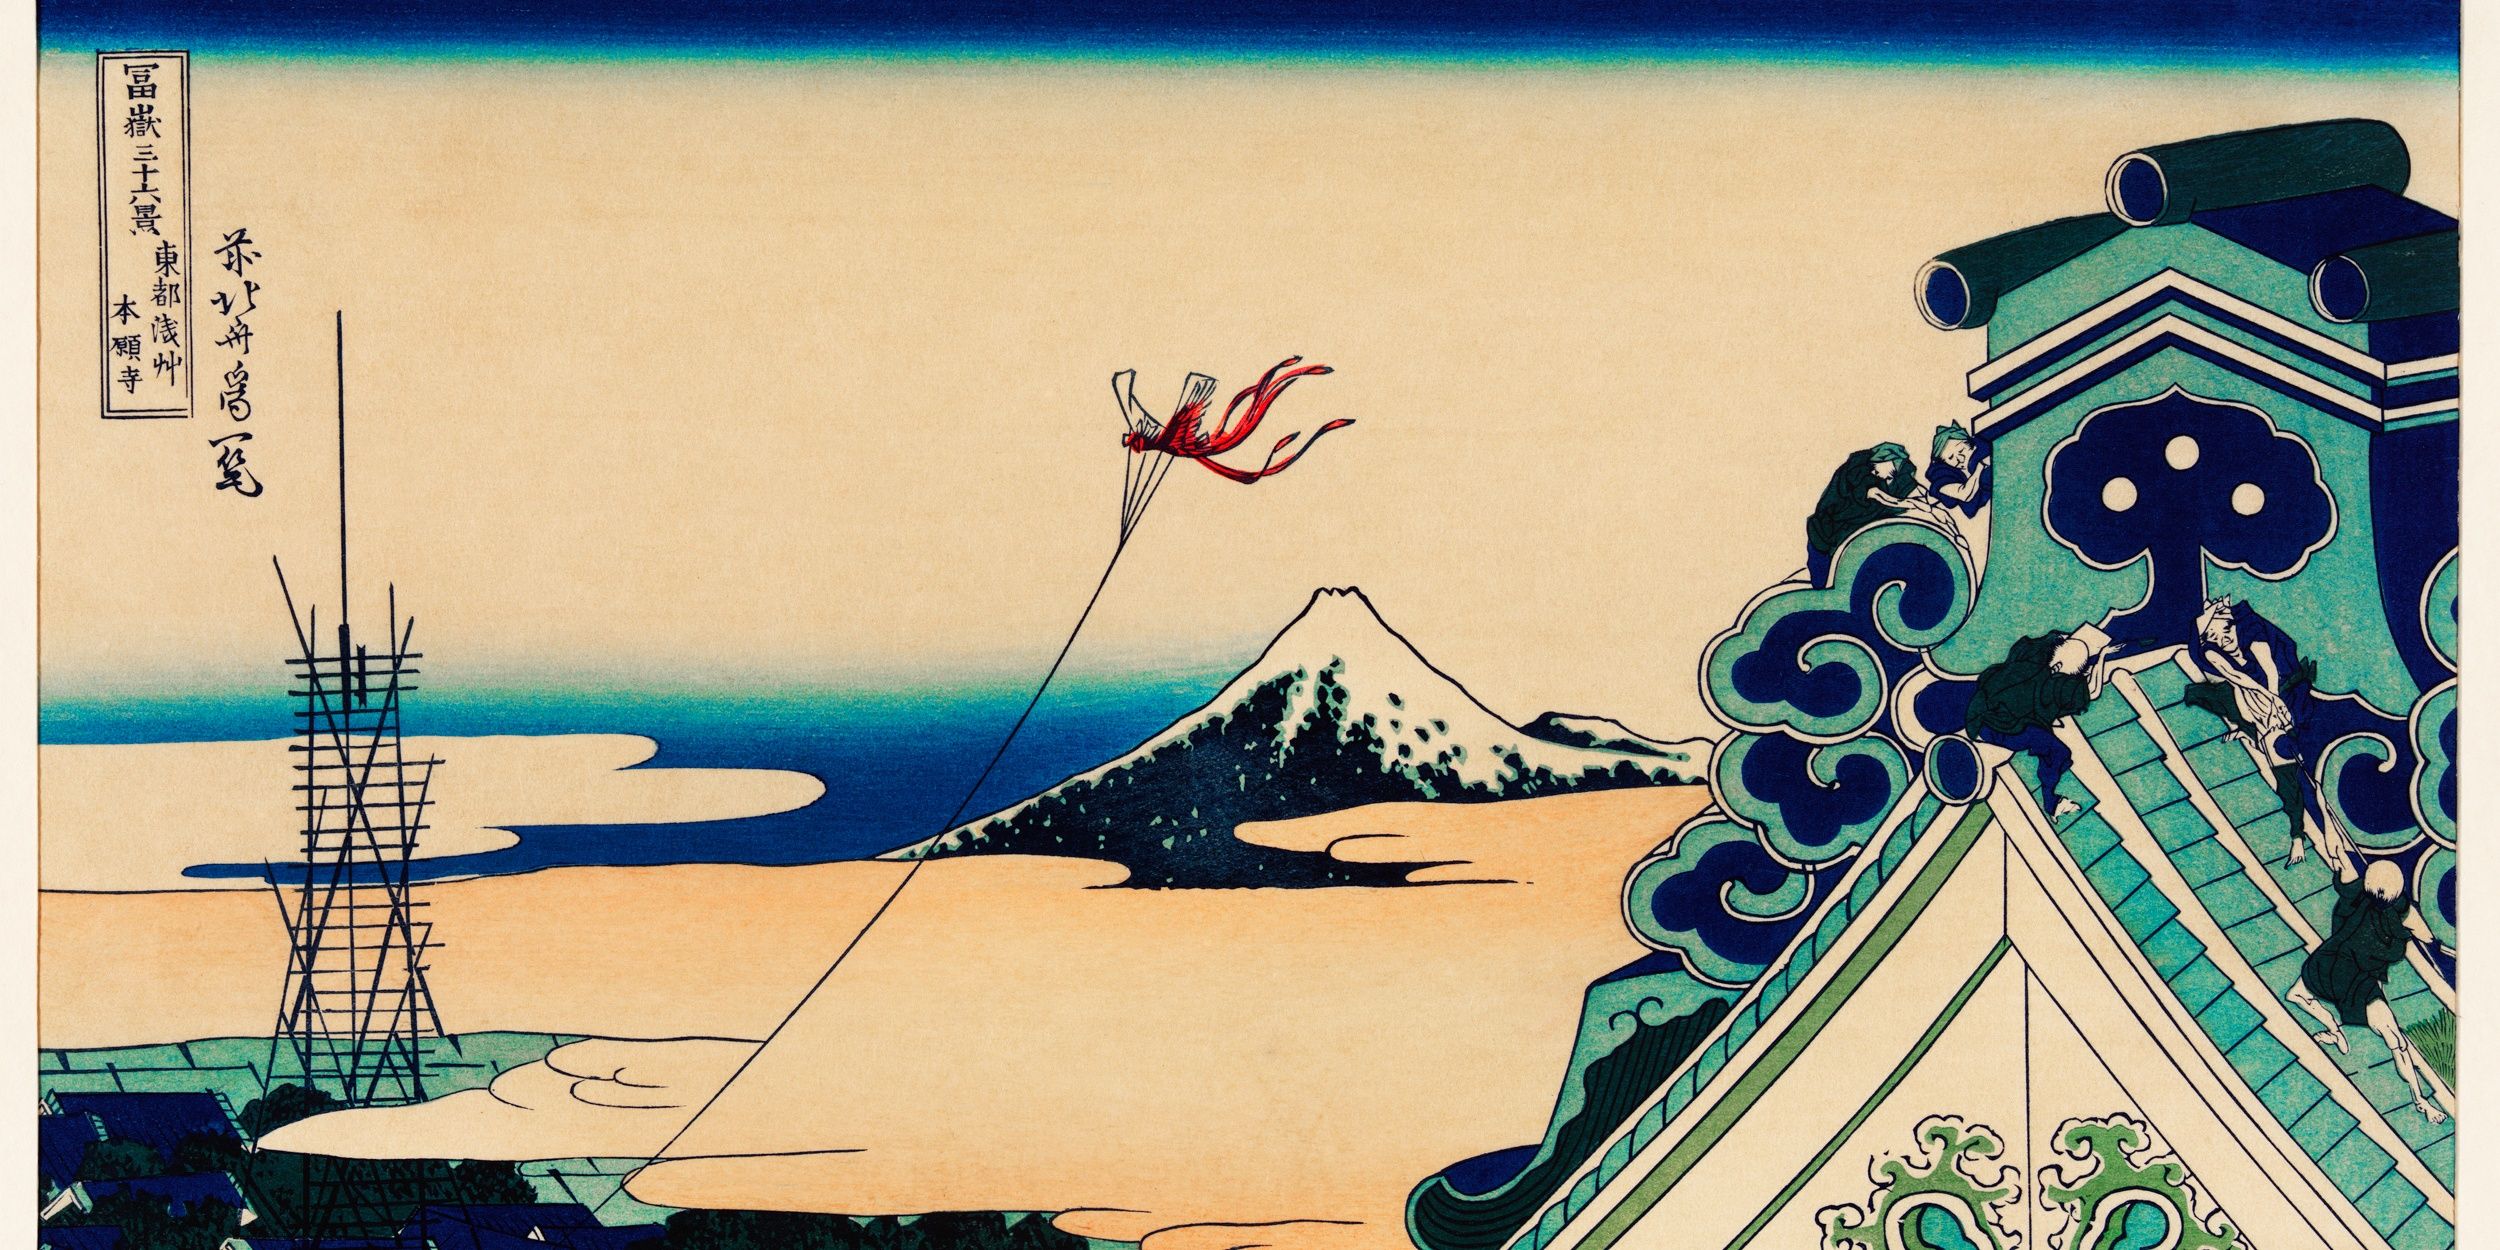 Ukiyo-e Woodblock painting featuring mountains, a kite and the roof of a building